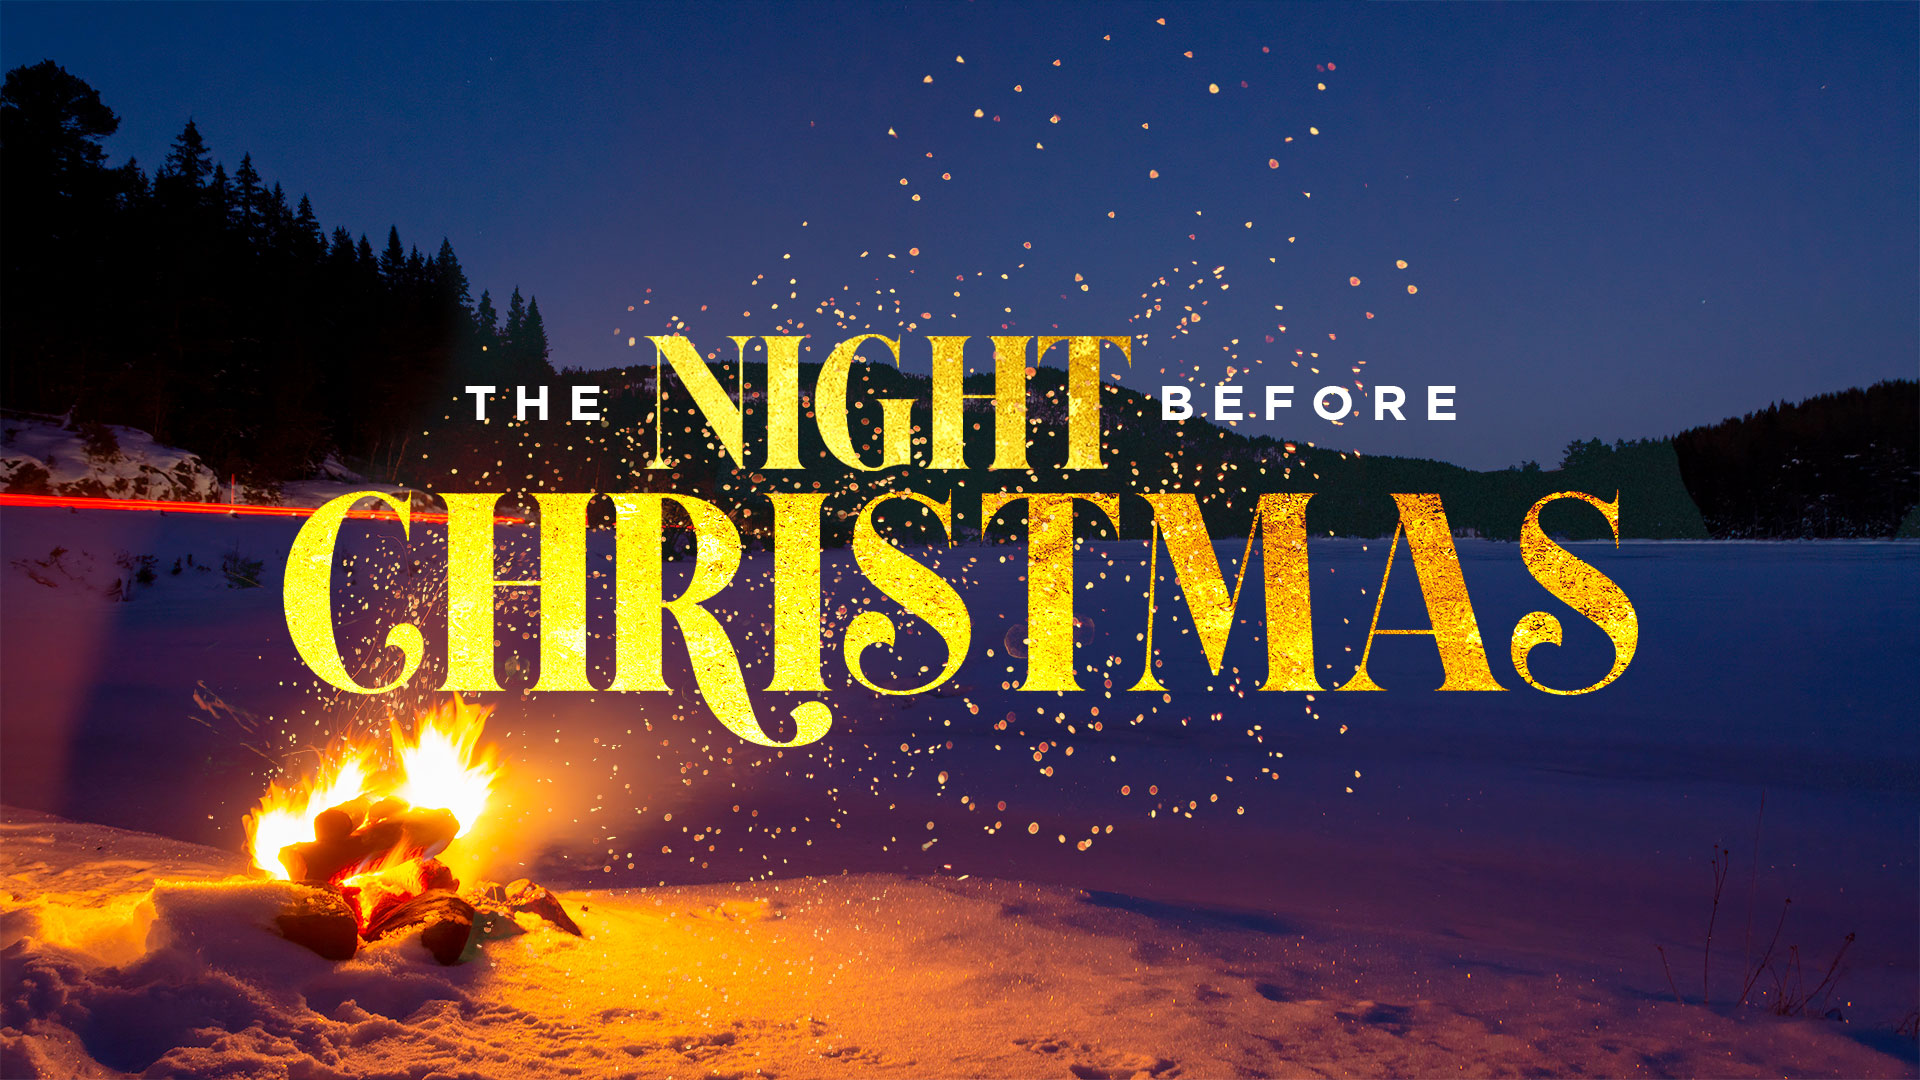   The Night Before Christmas